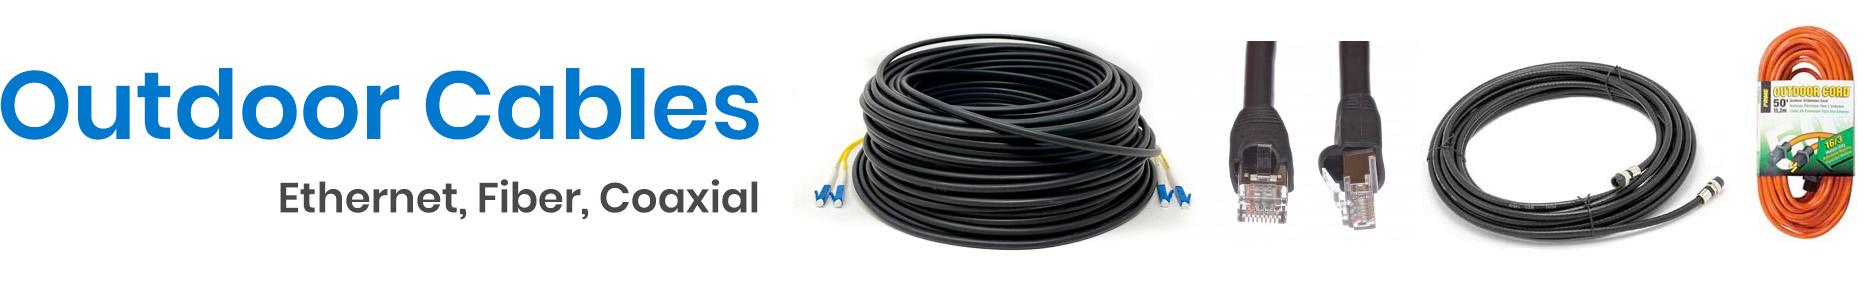 Shop Outdoor Cables Outdoor Networking Cables